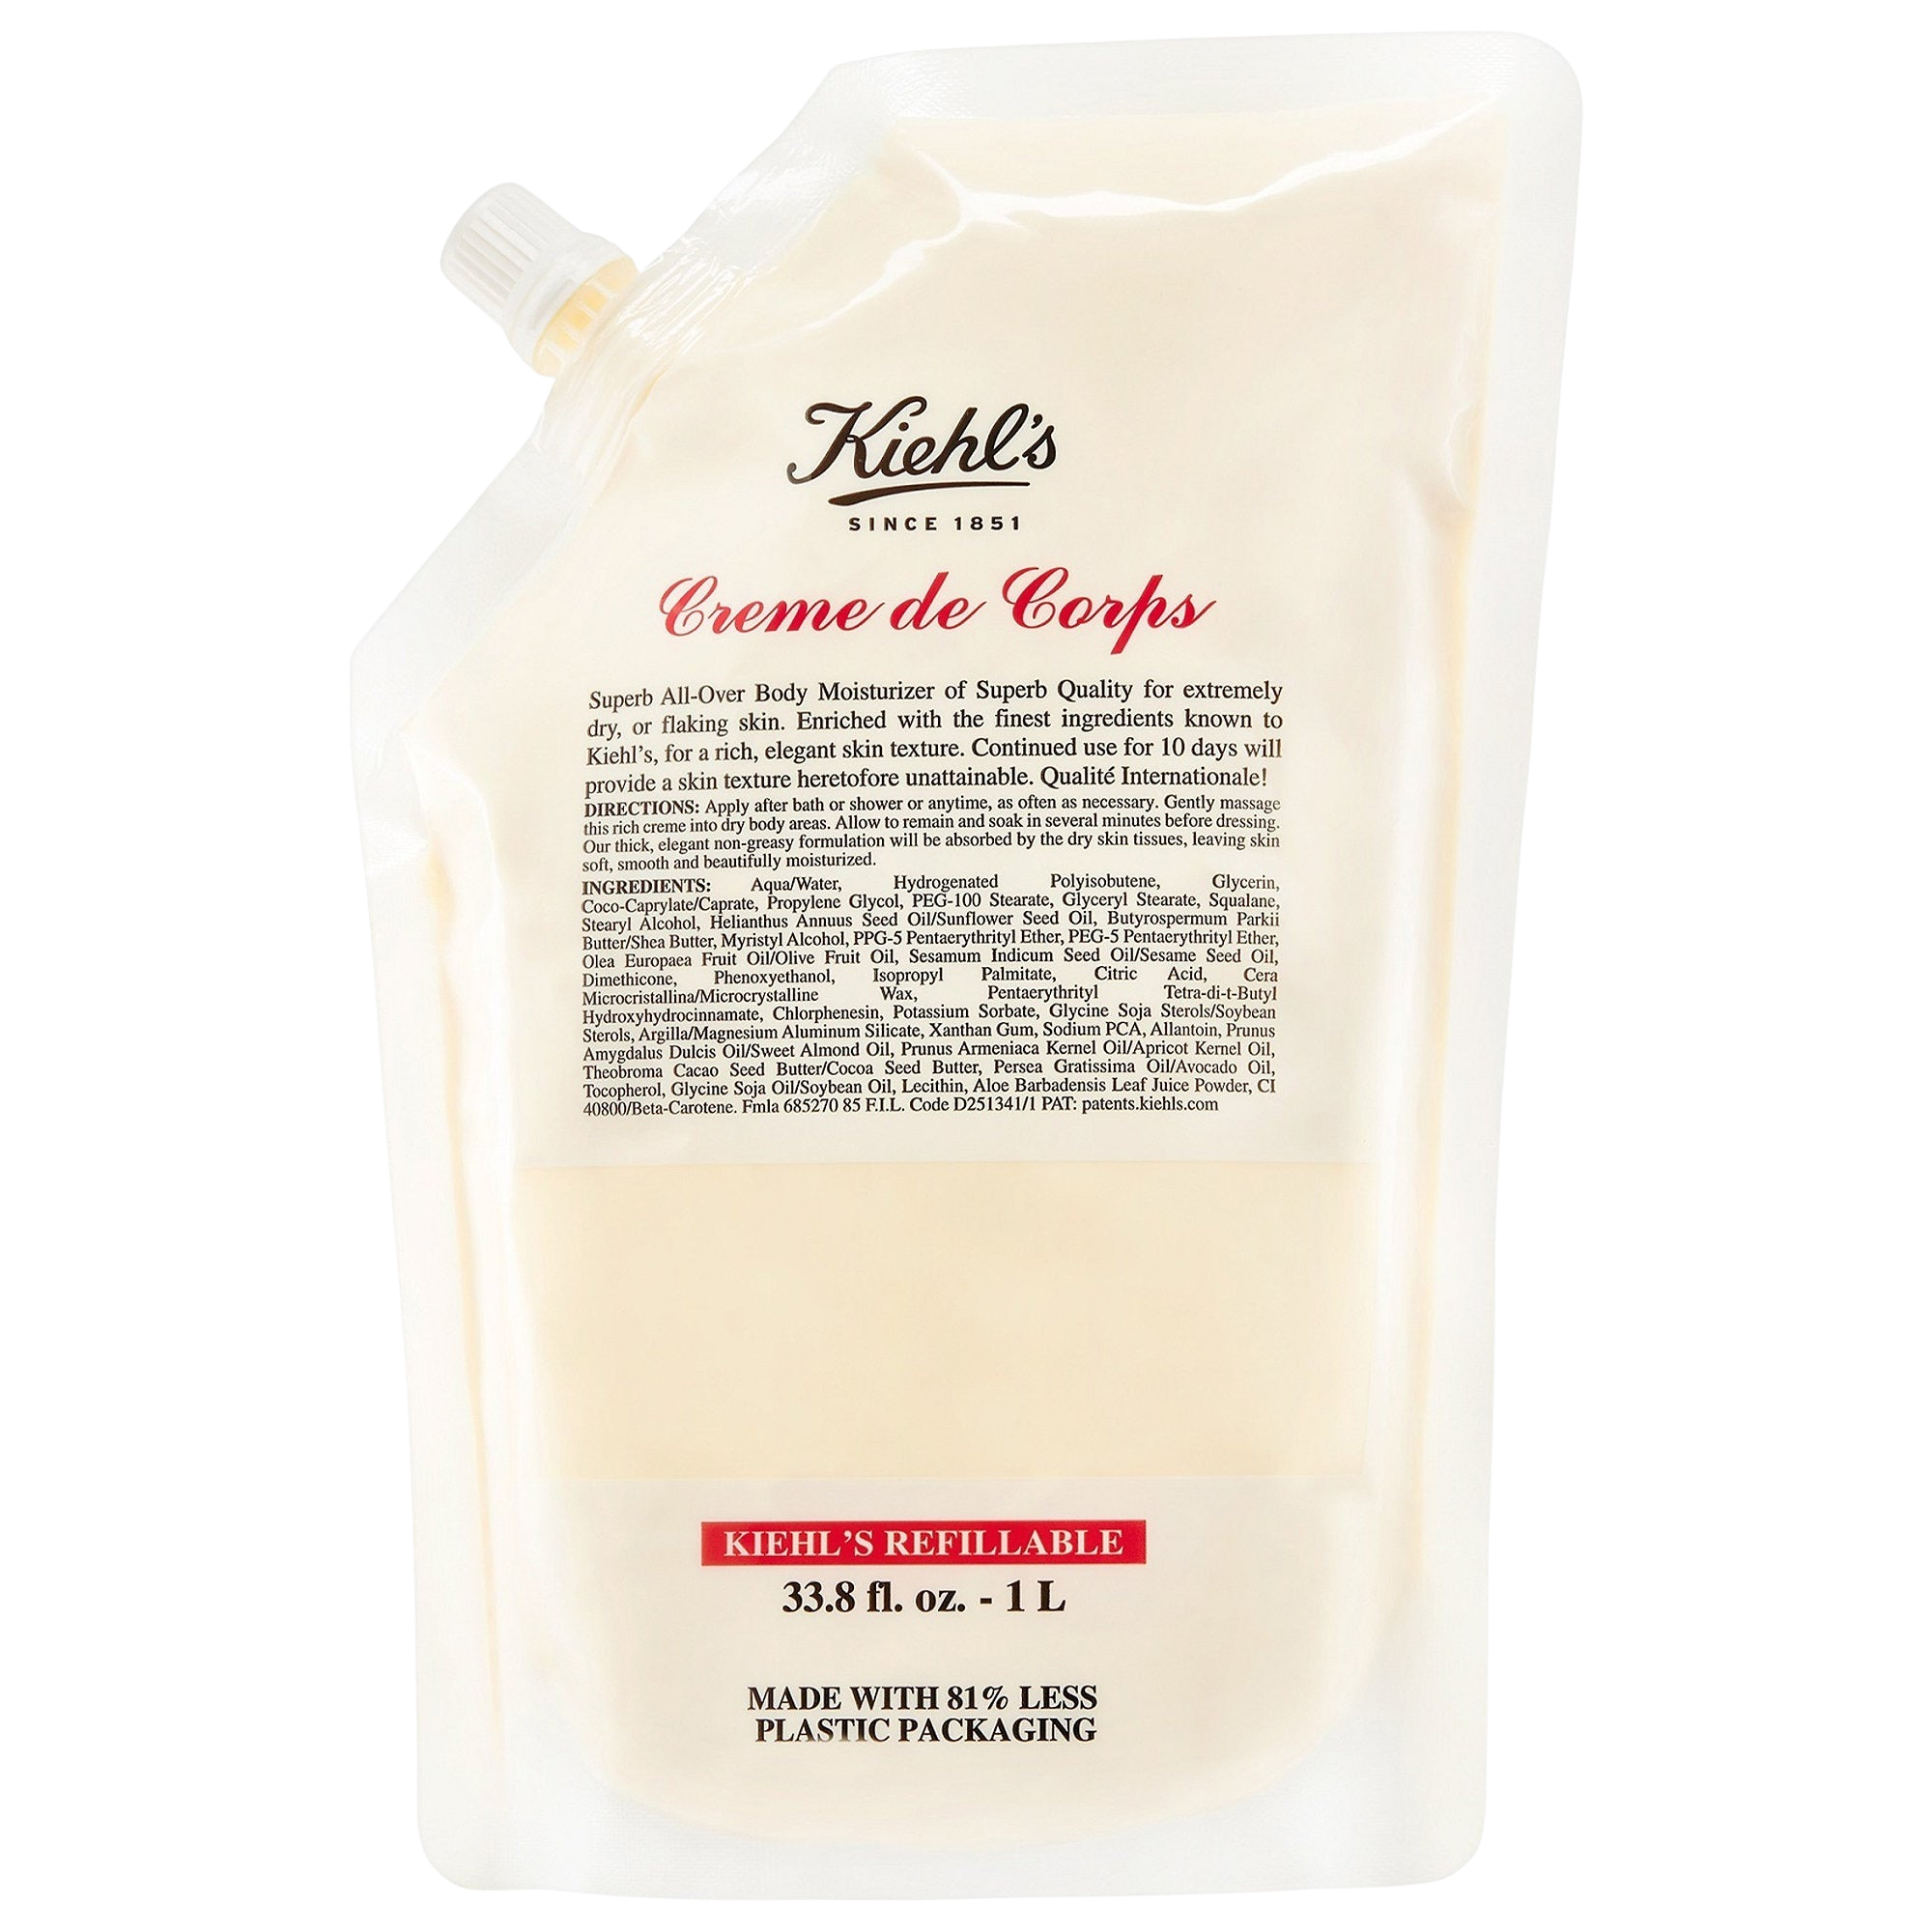 Load image into Gallery viewer, Kiehl&#39;s Since 1851 Creme de Corps Soy Milk &amp; Honey Whipped Body Butter
